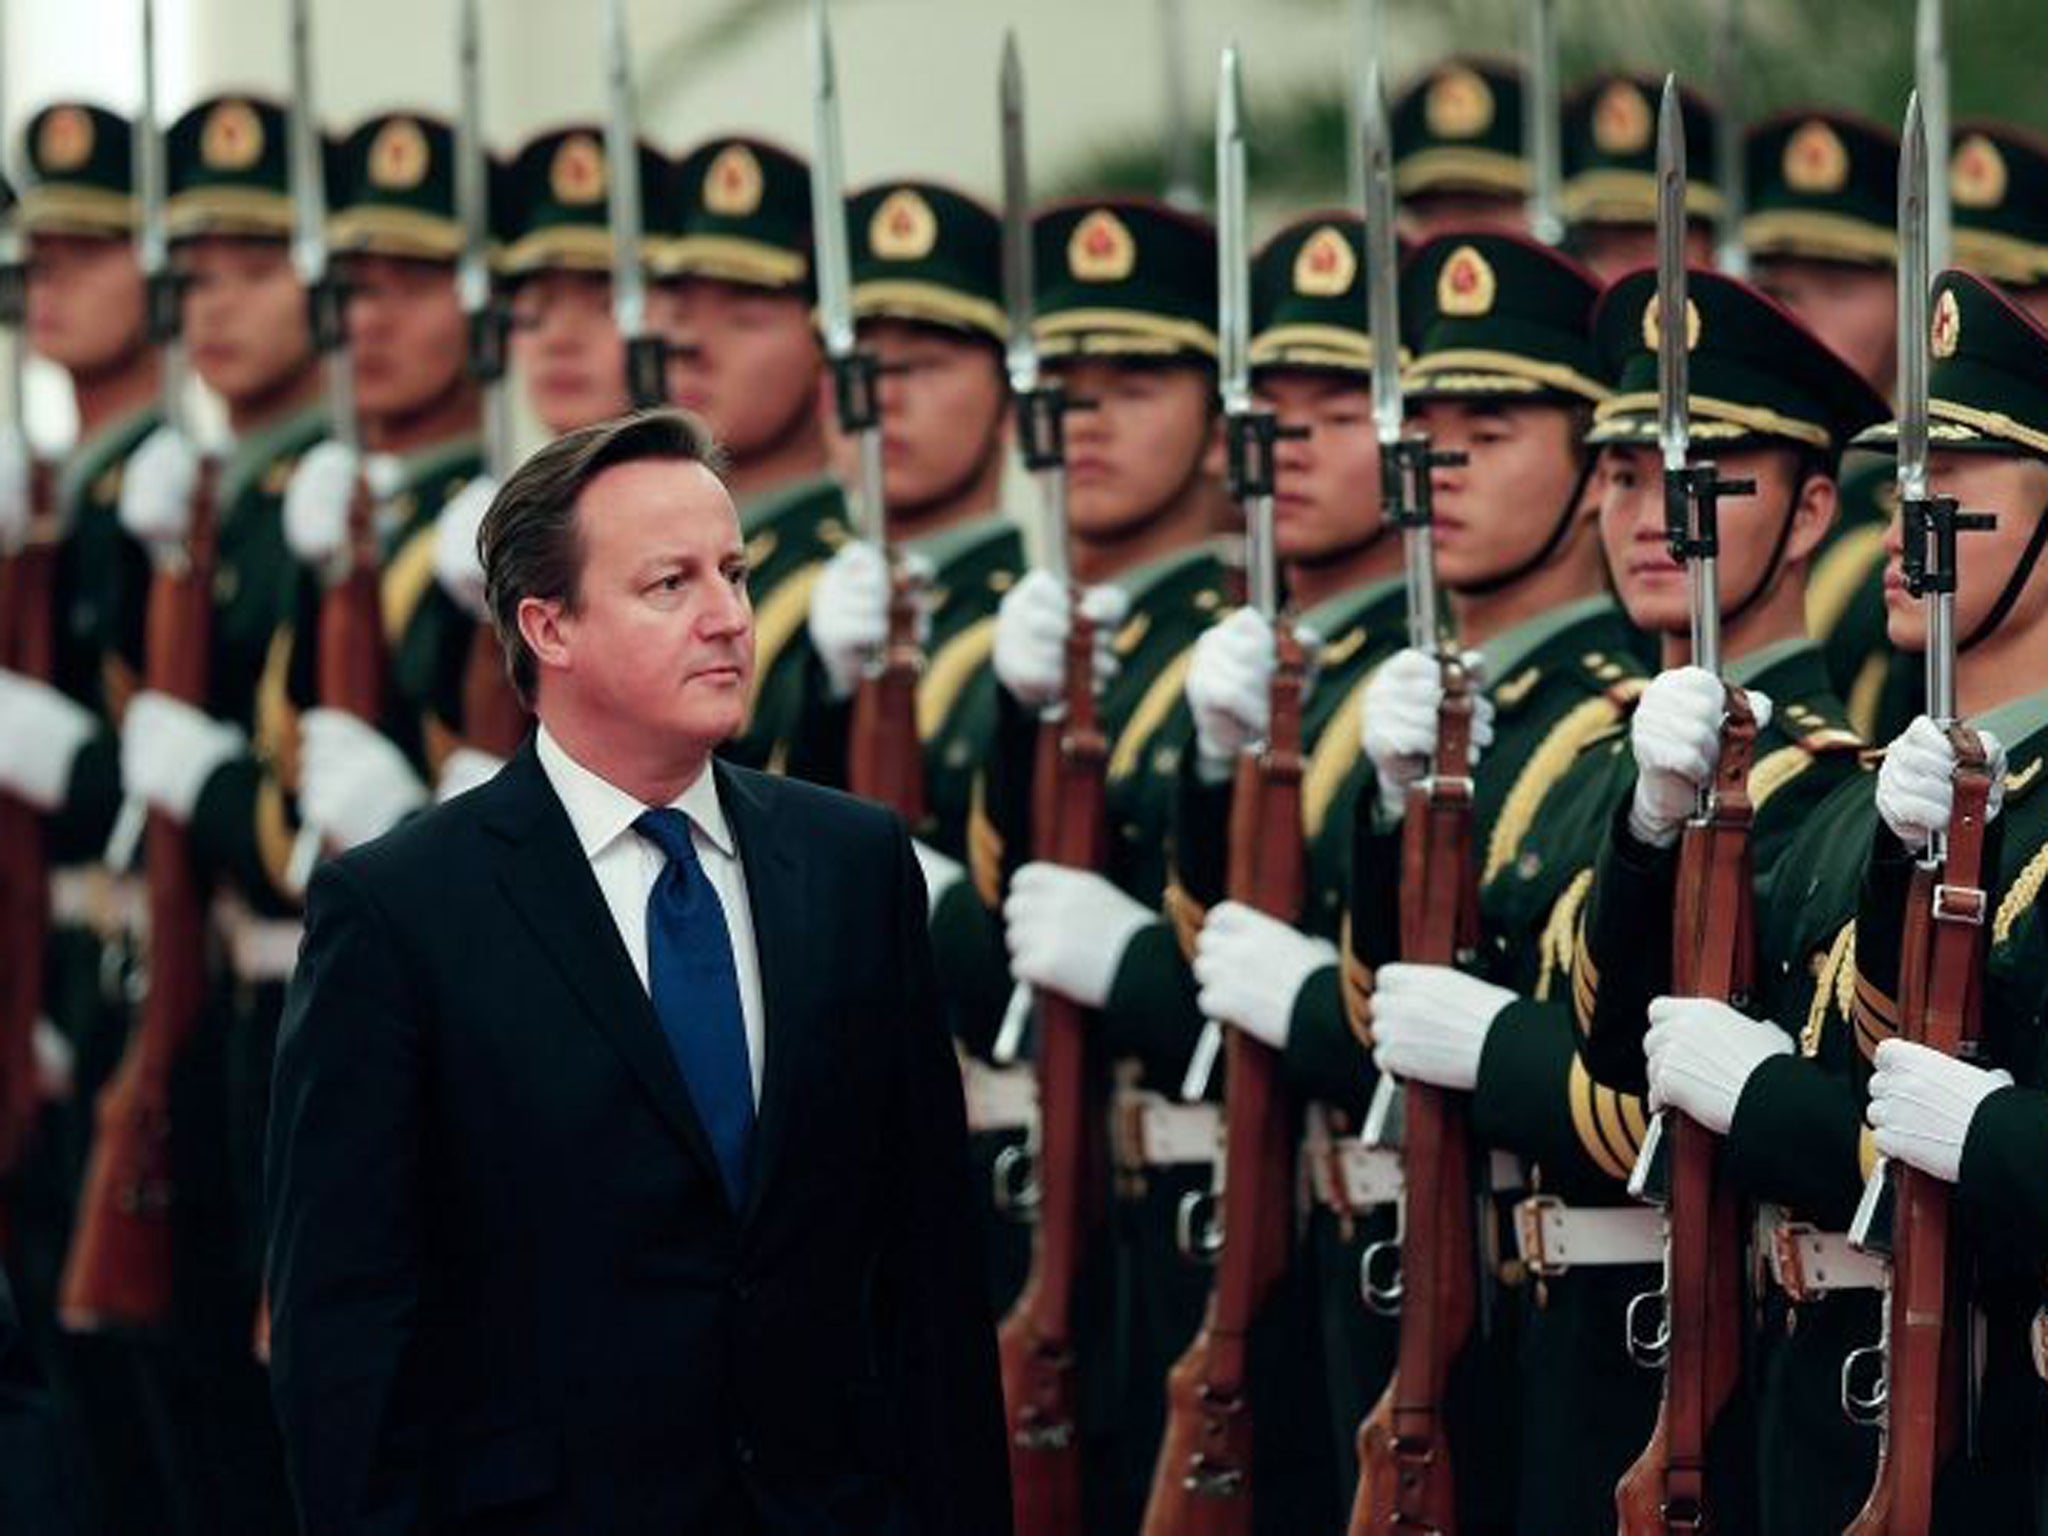 David Cameron is leading Britain's largest trade mission to China, with more than 100 leaders from business, education, and cultural fields, along with six government ministers attending